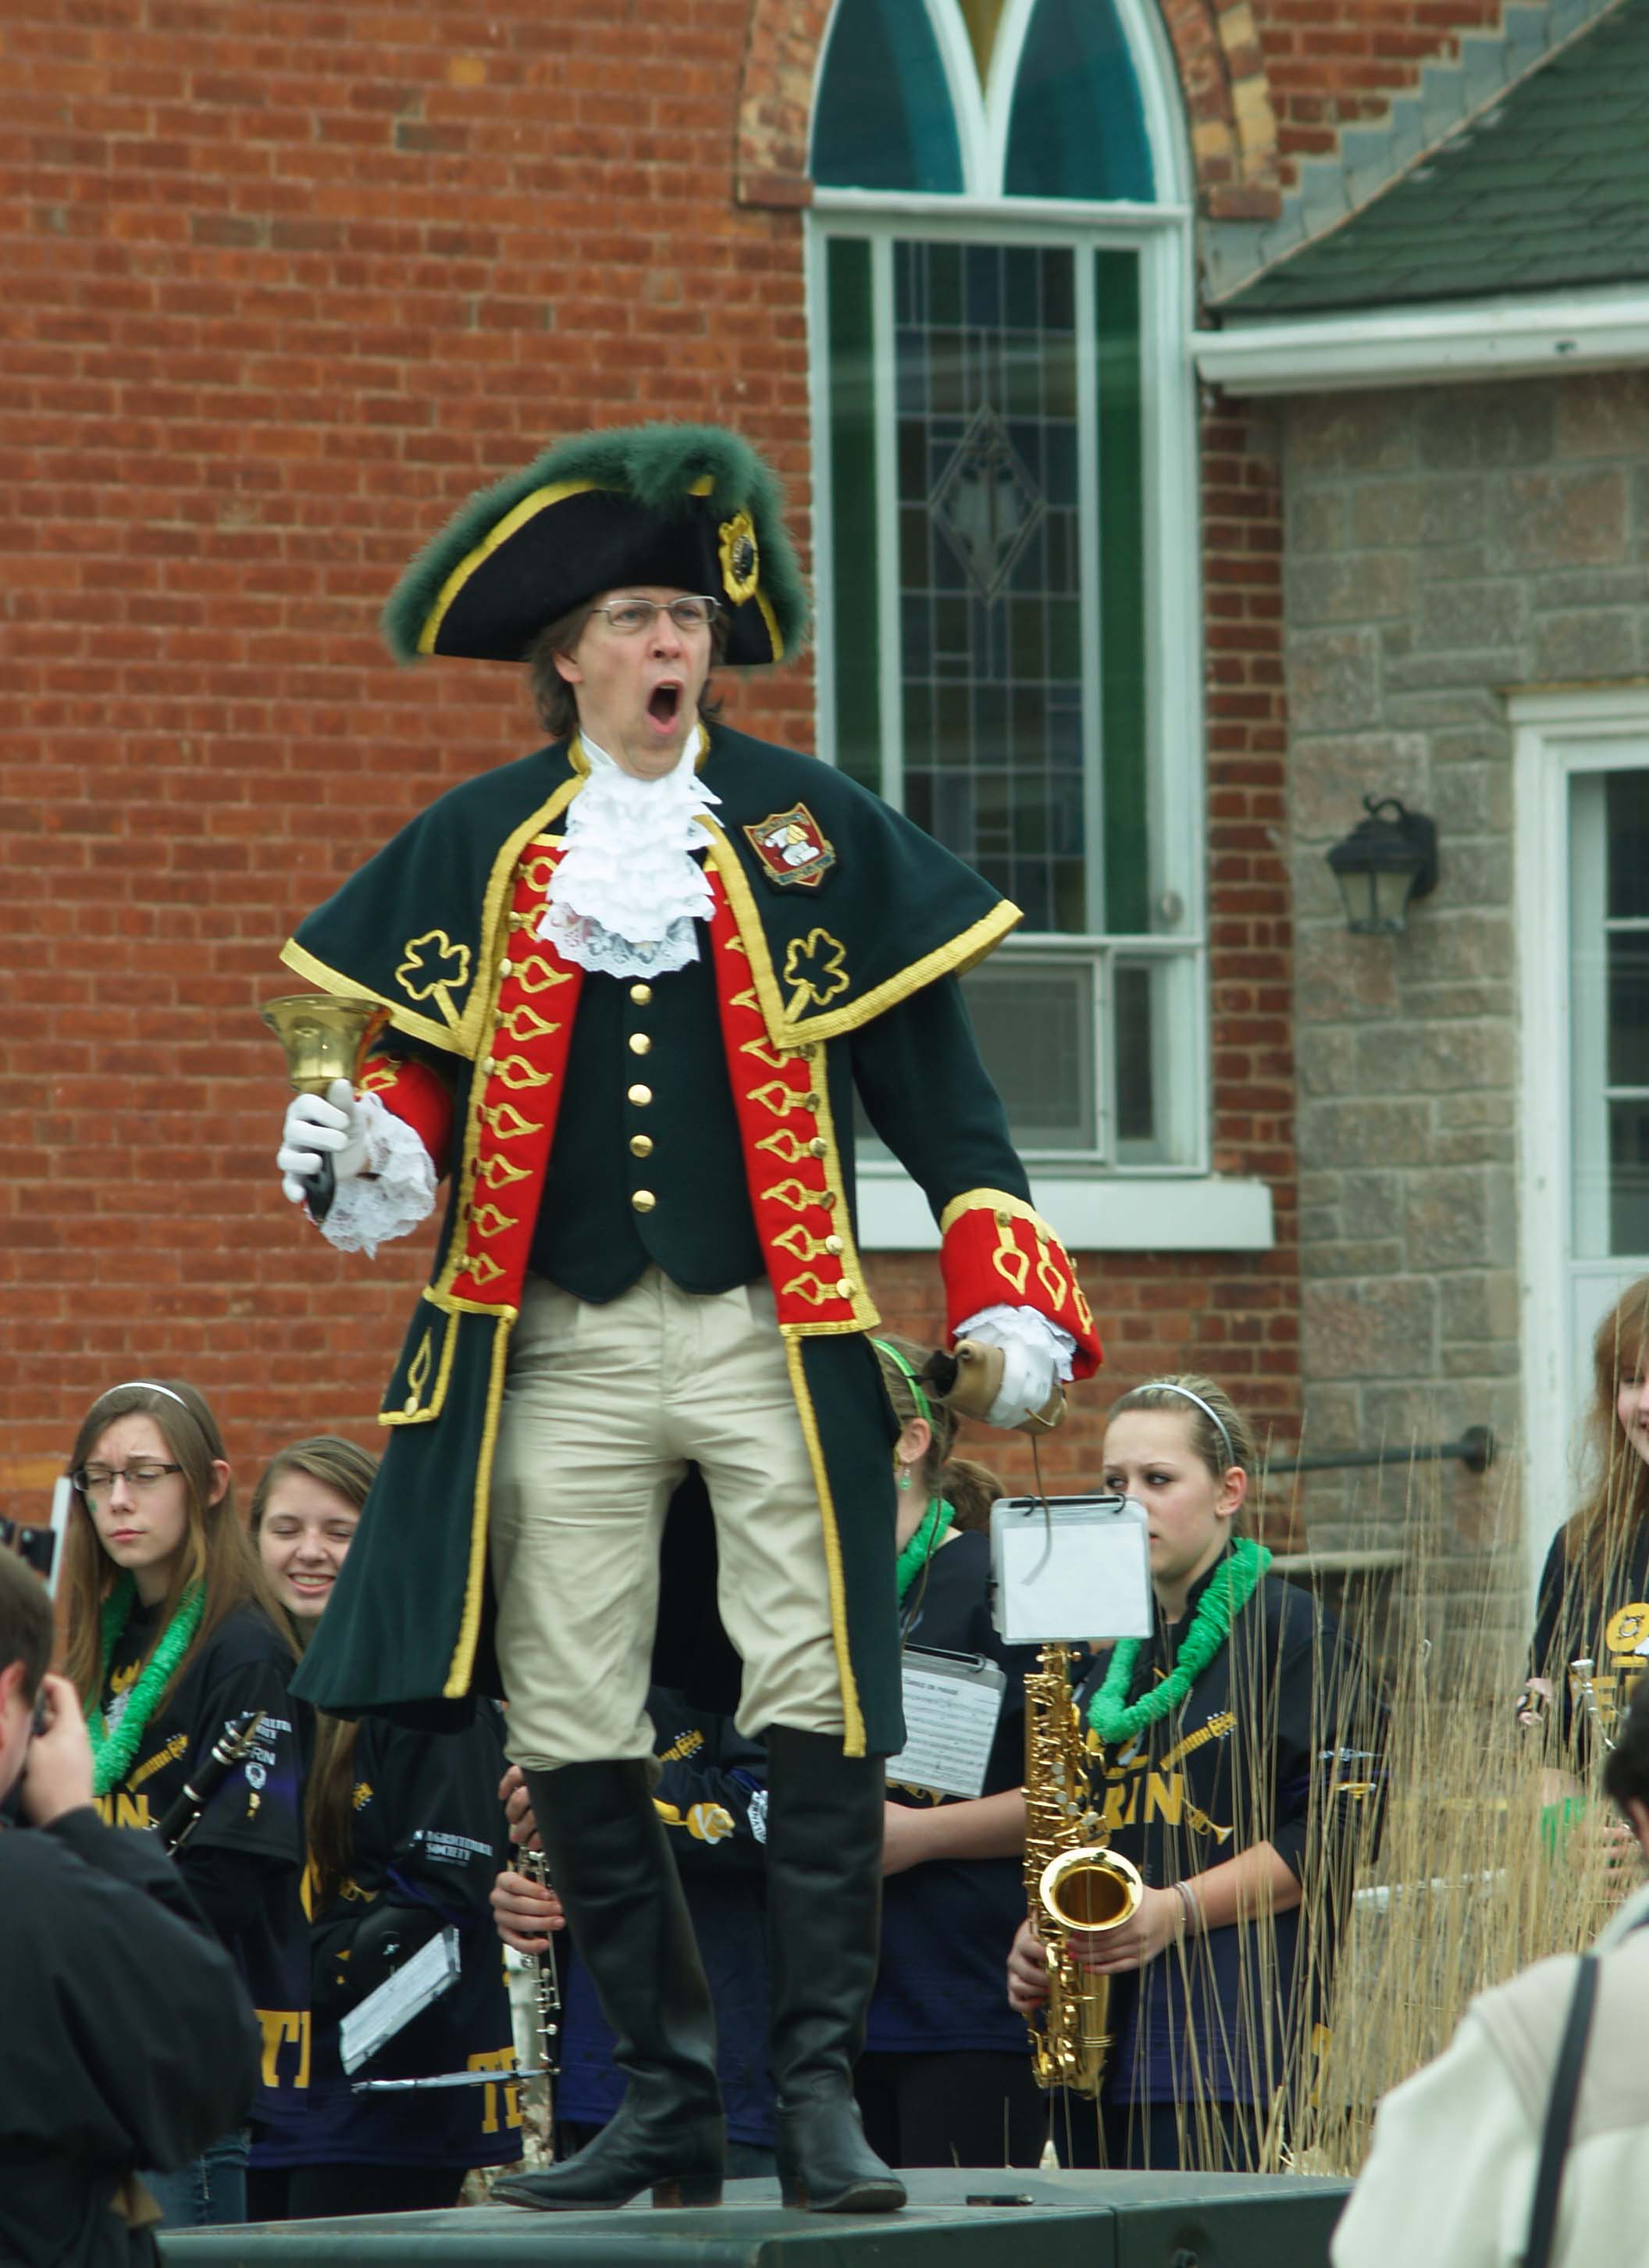 Town Crier - St. Patrick's Day proclamation